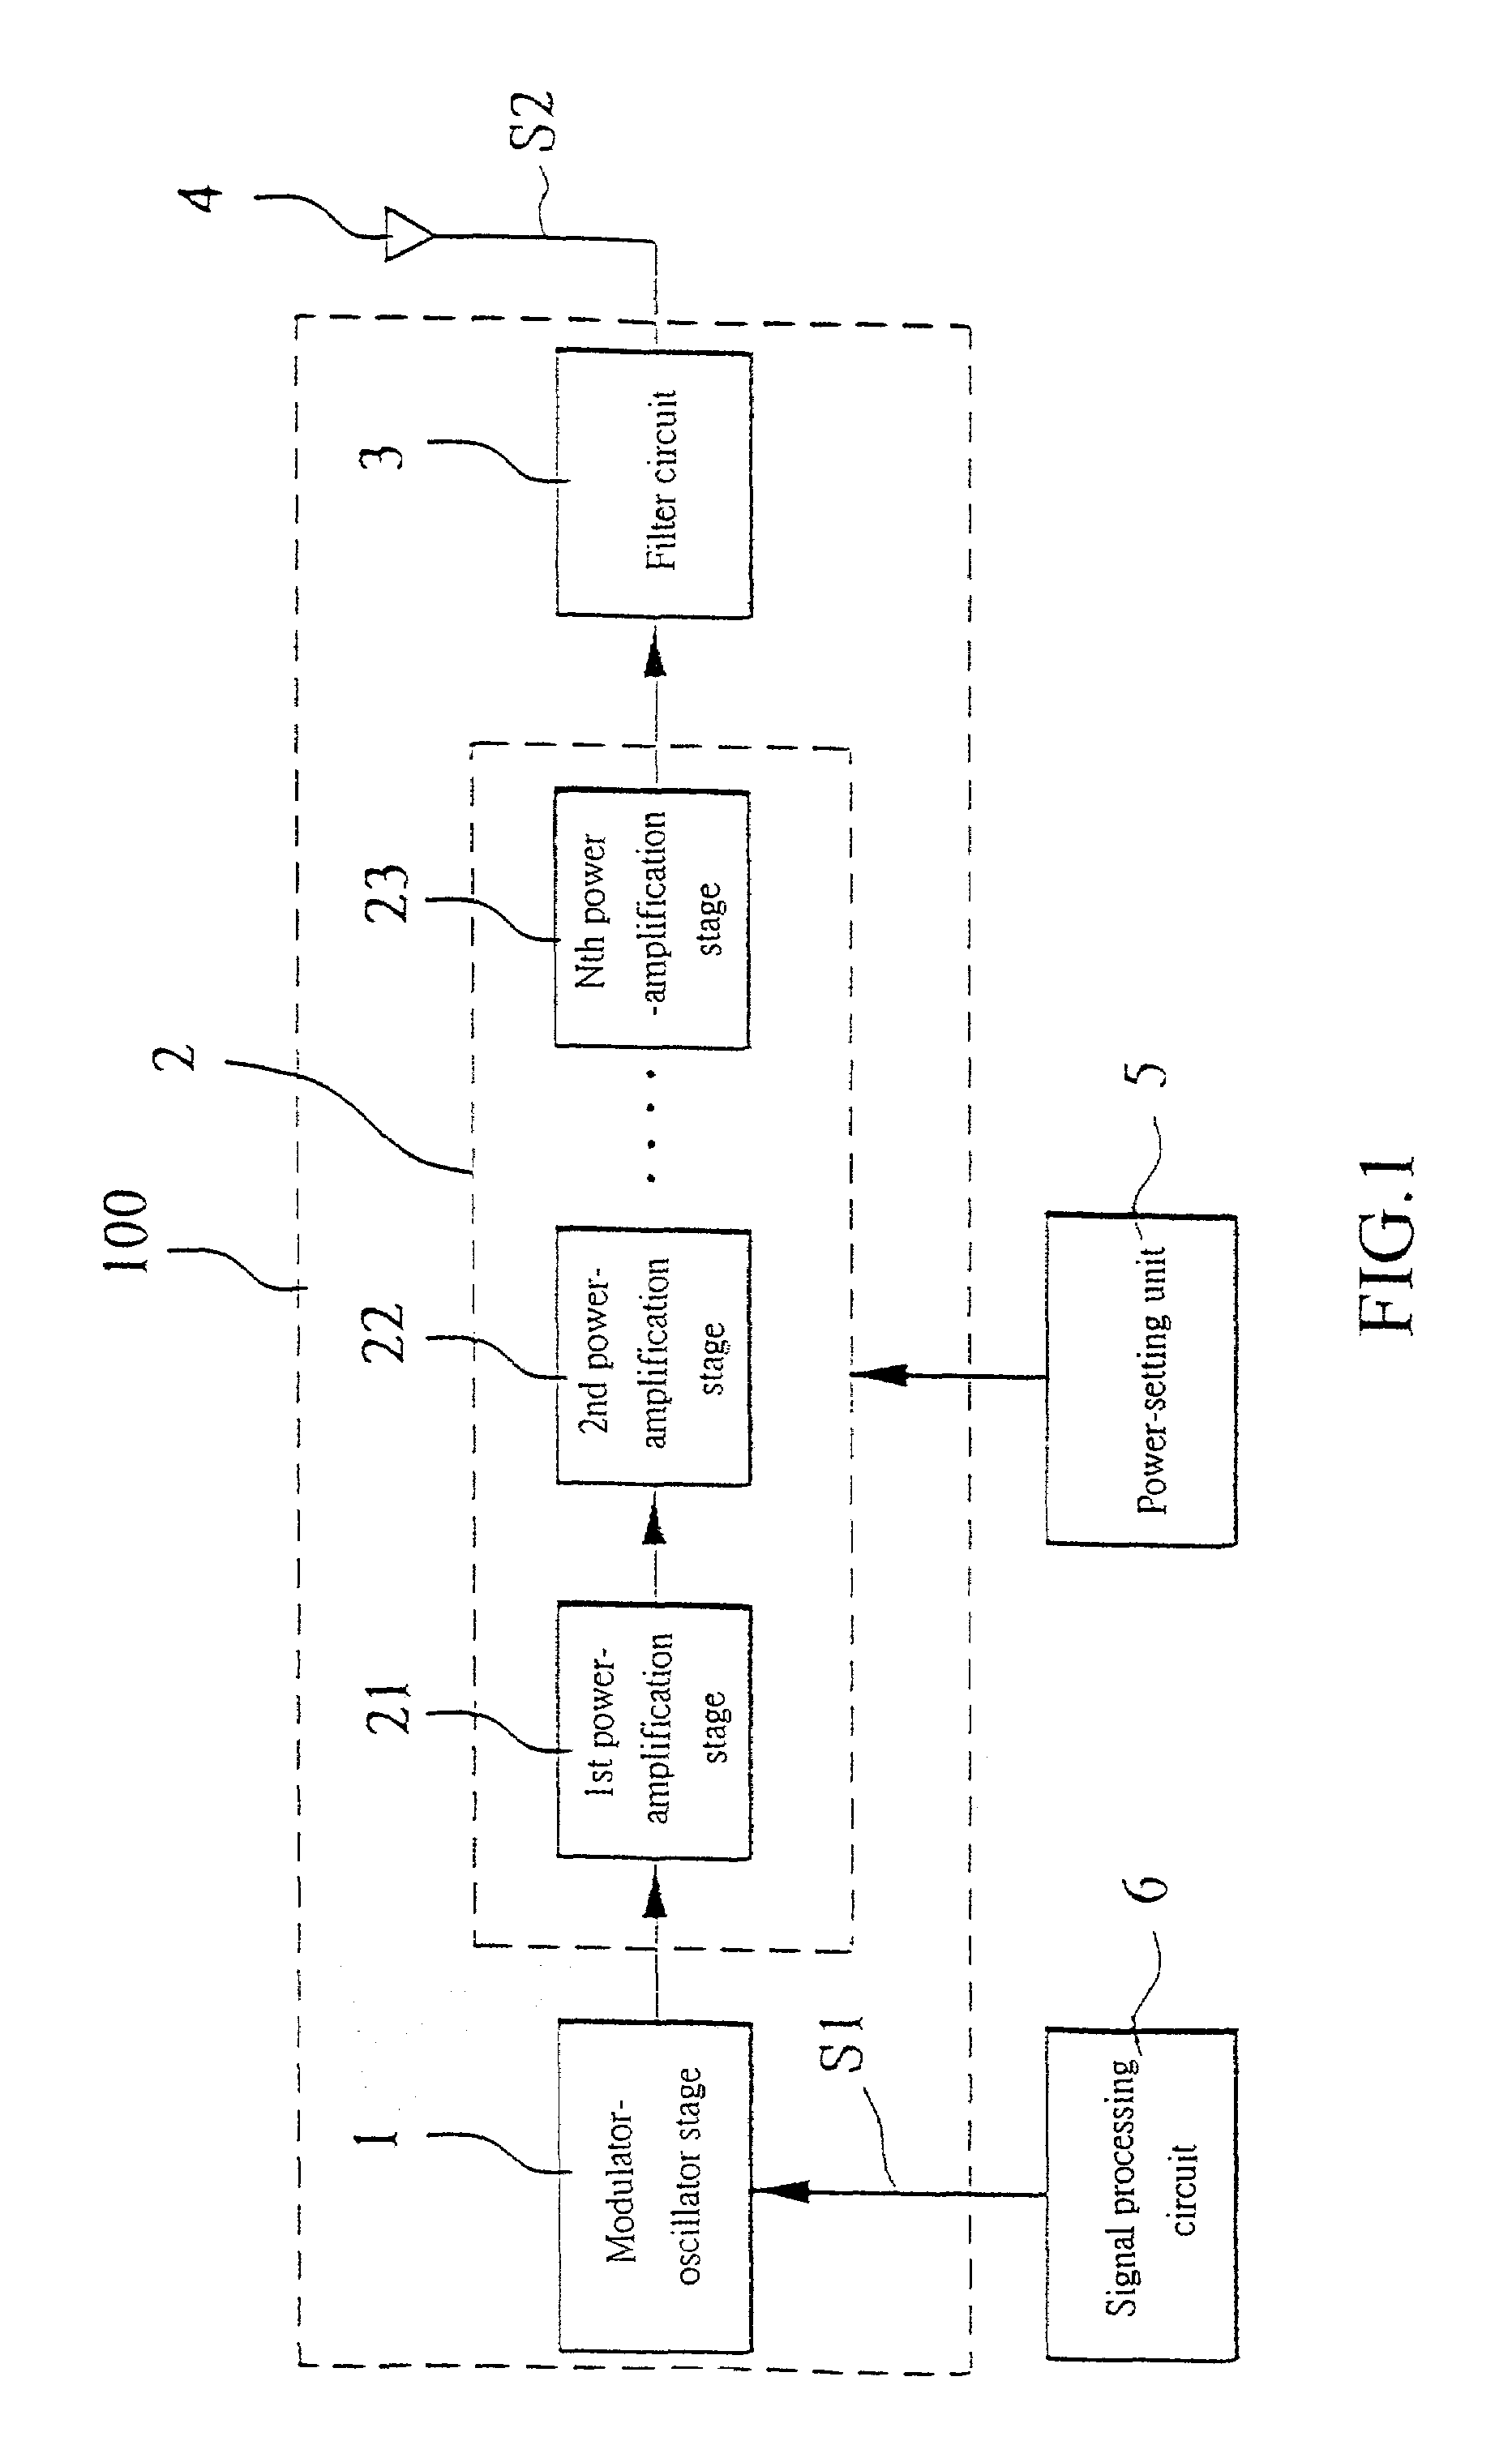 Wireless transmission circuit enabling modulation of radio frequency power amplification